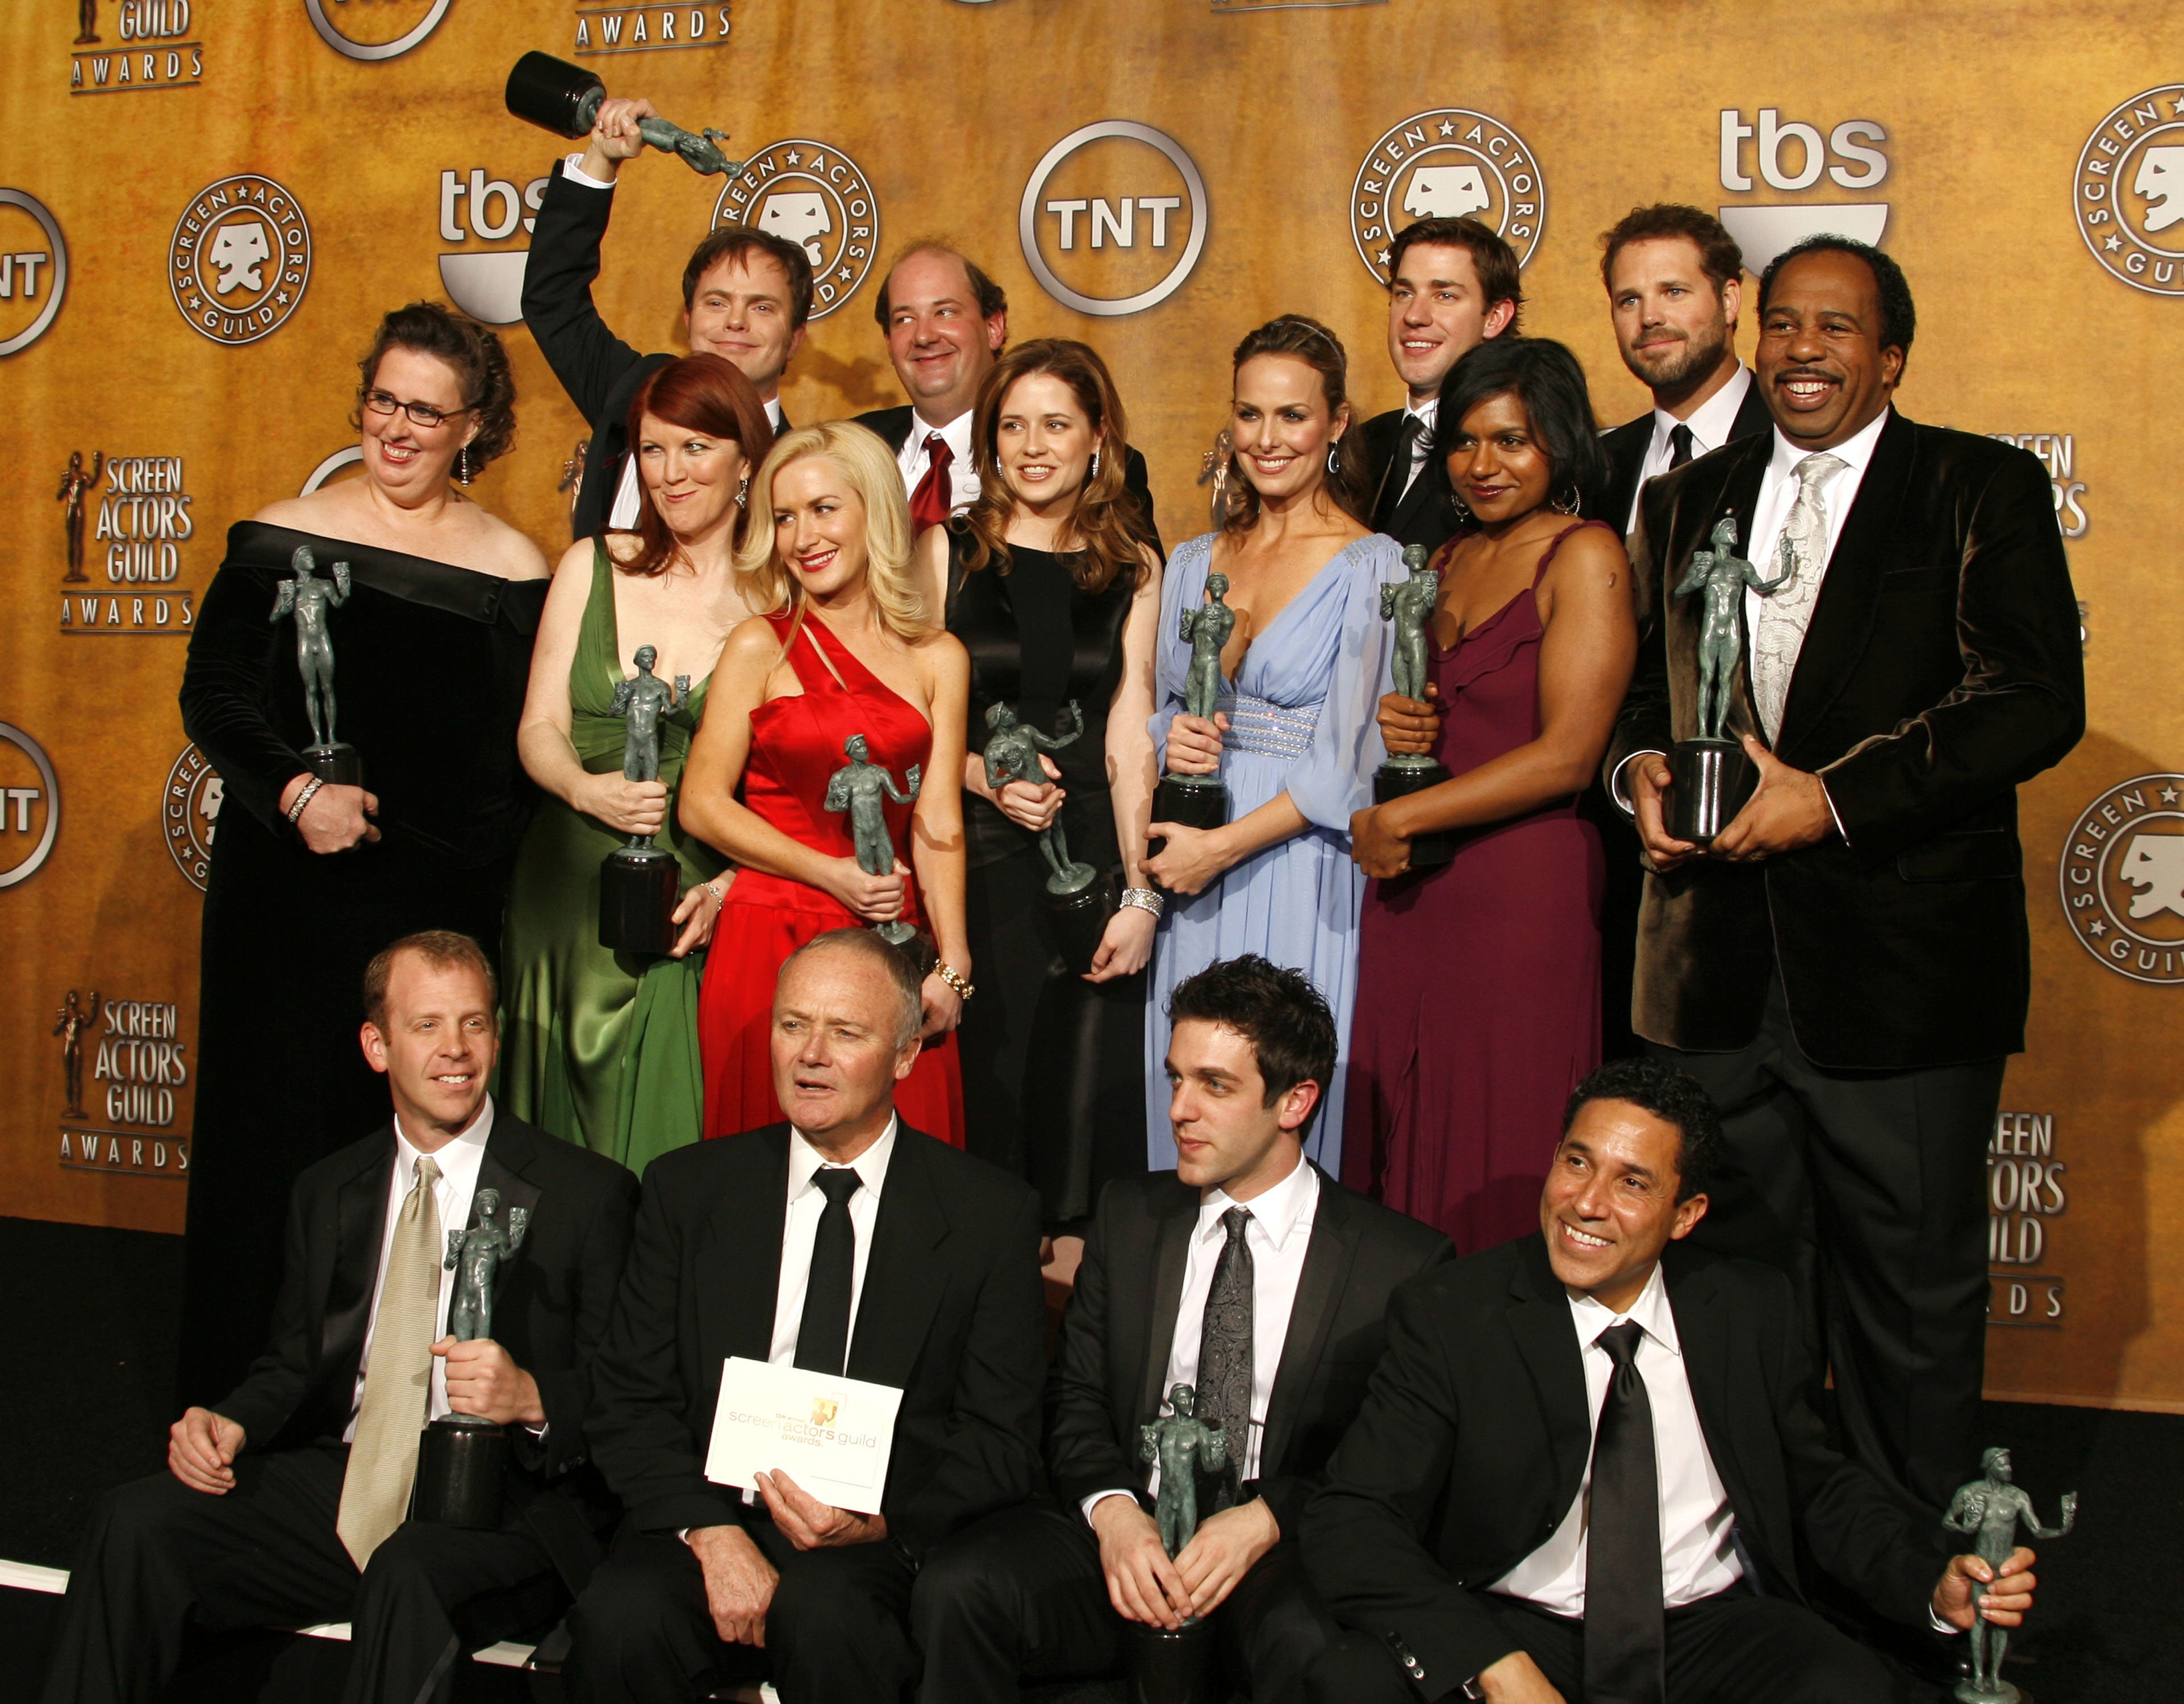 'The Office' cast at the 13th annual SAG Awards